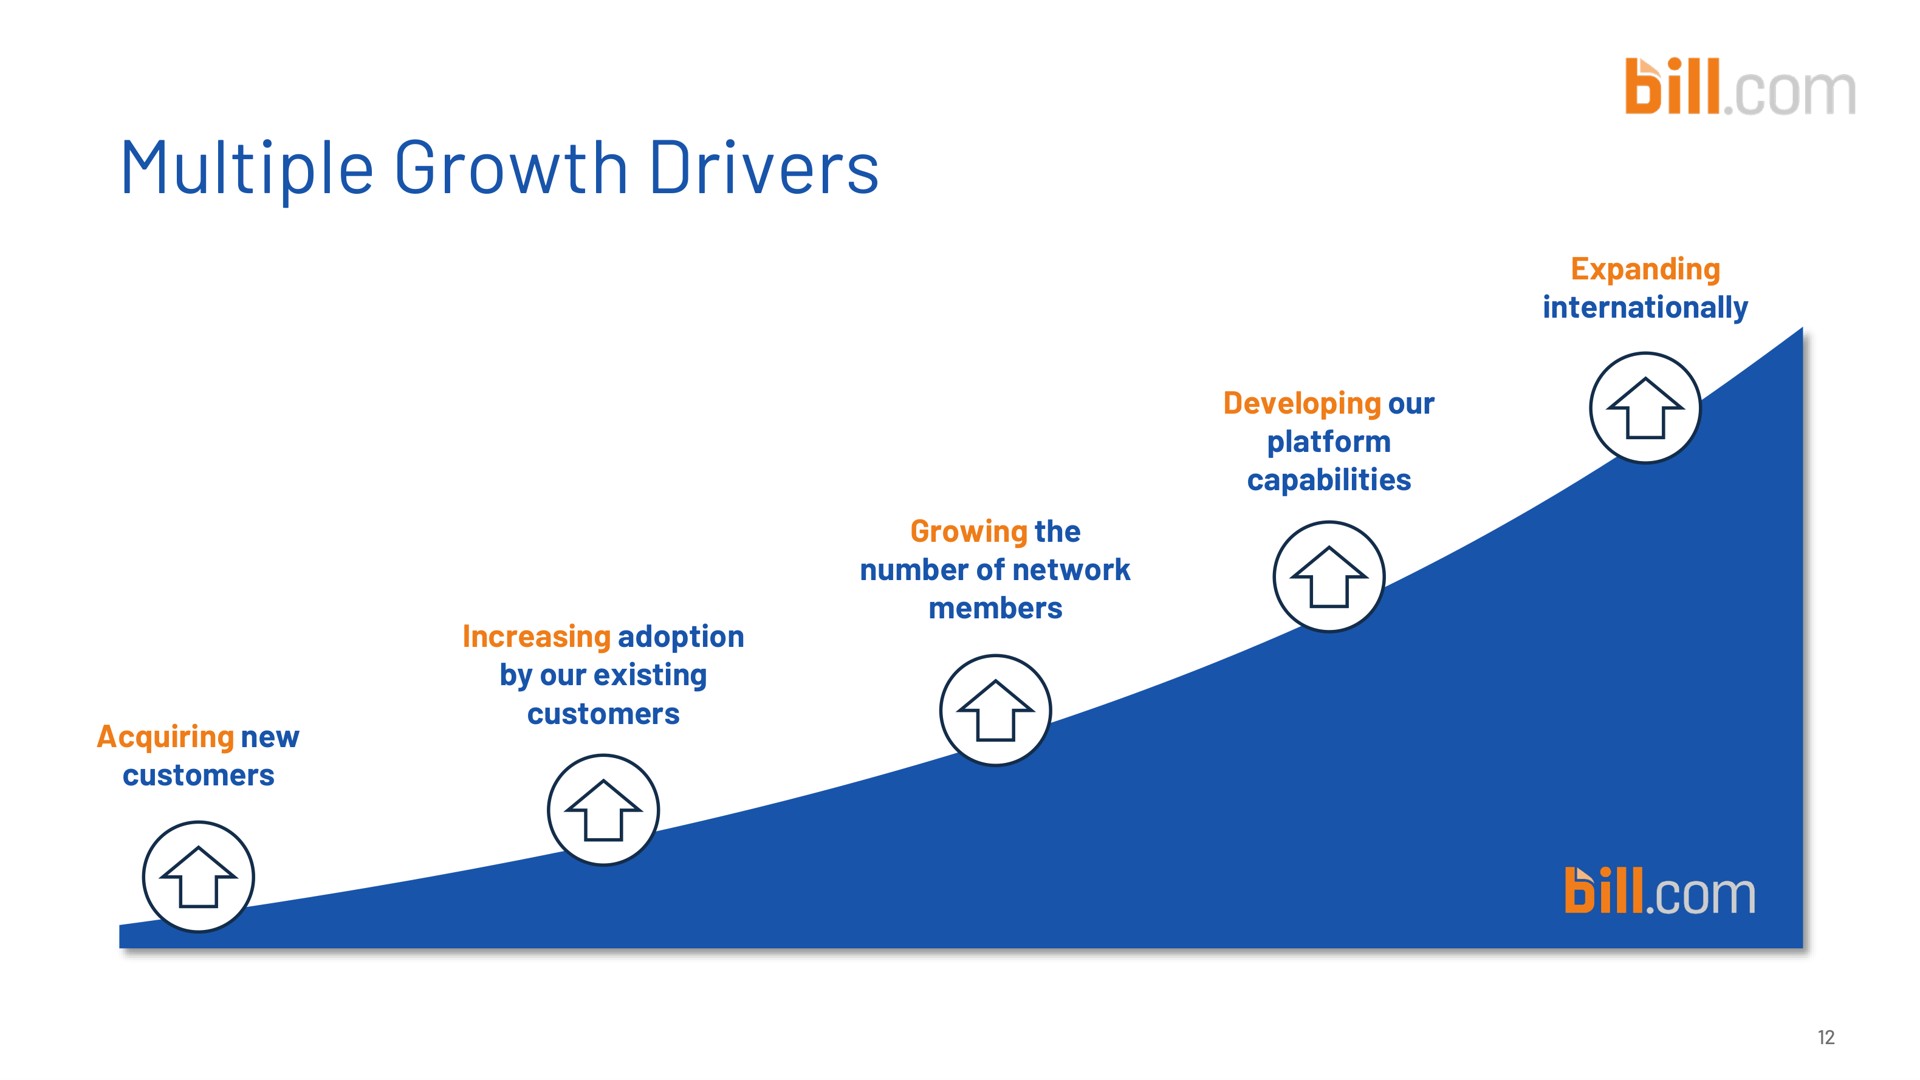 multiple growth drivers to leverage multiple growth drivers bill | Bill.com